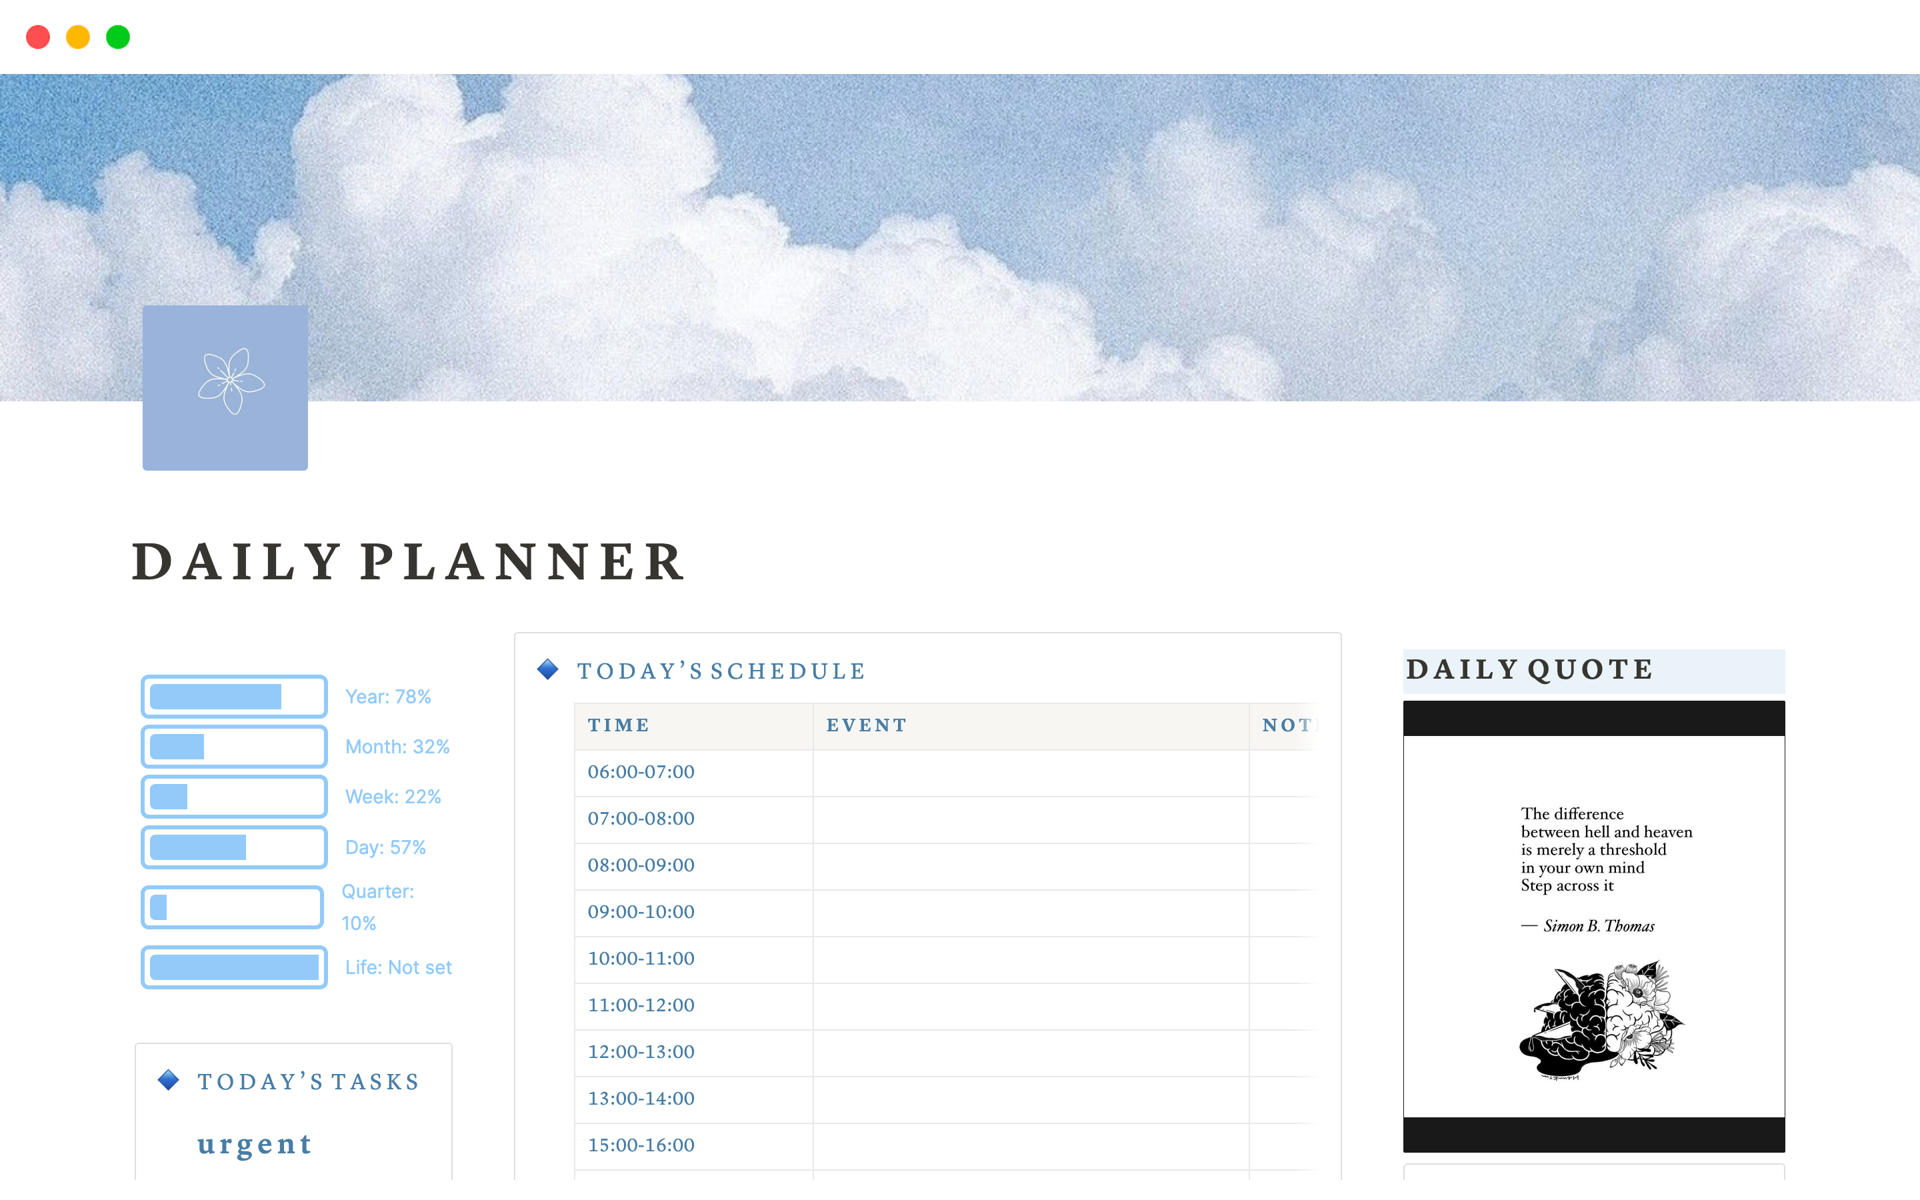 Organize your everyday life effortlessly with this Aesthetic daily planner.

